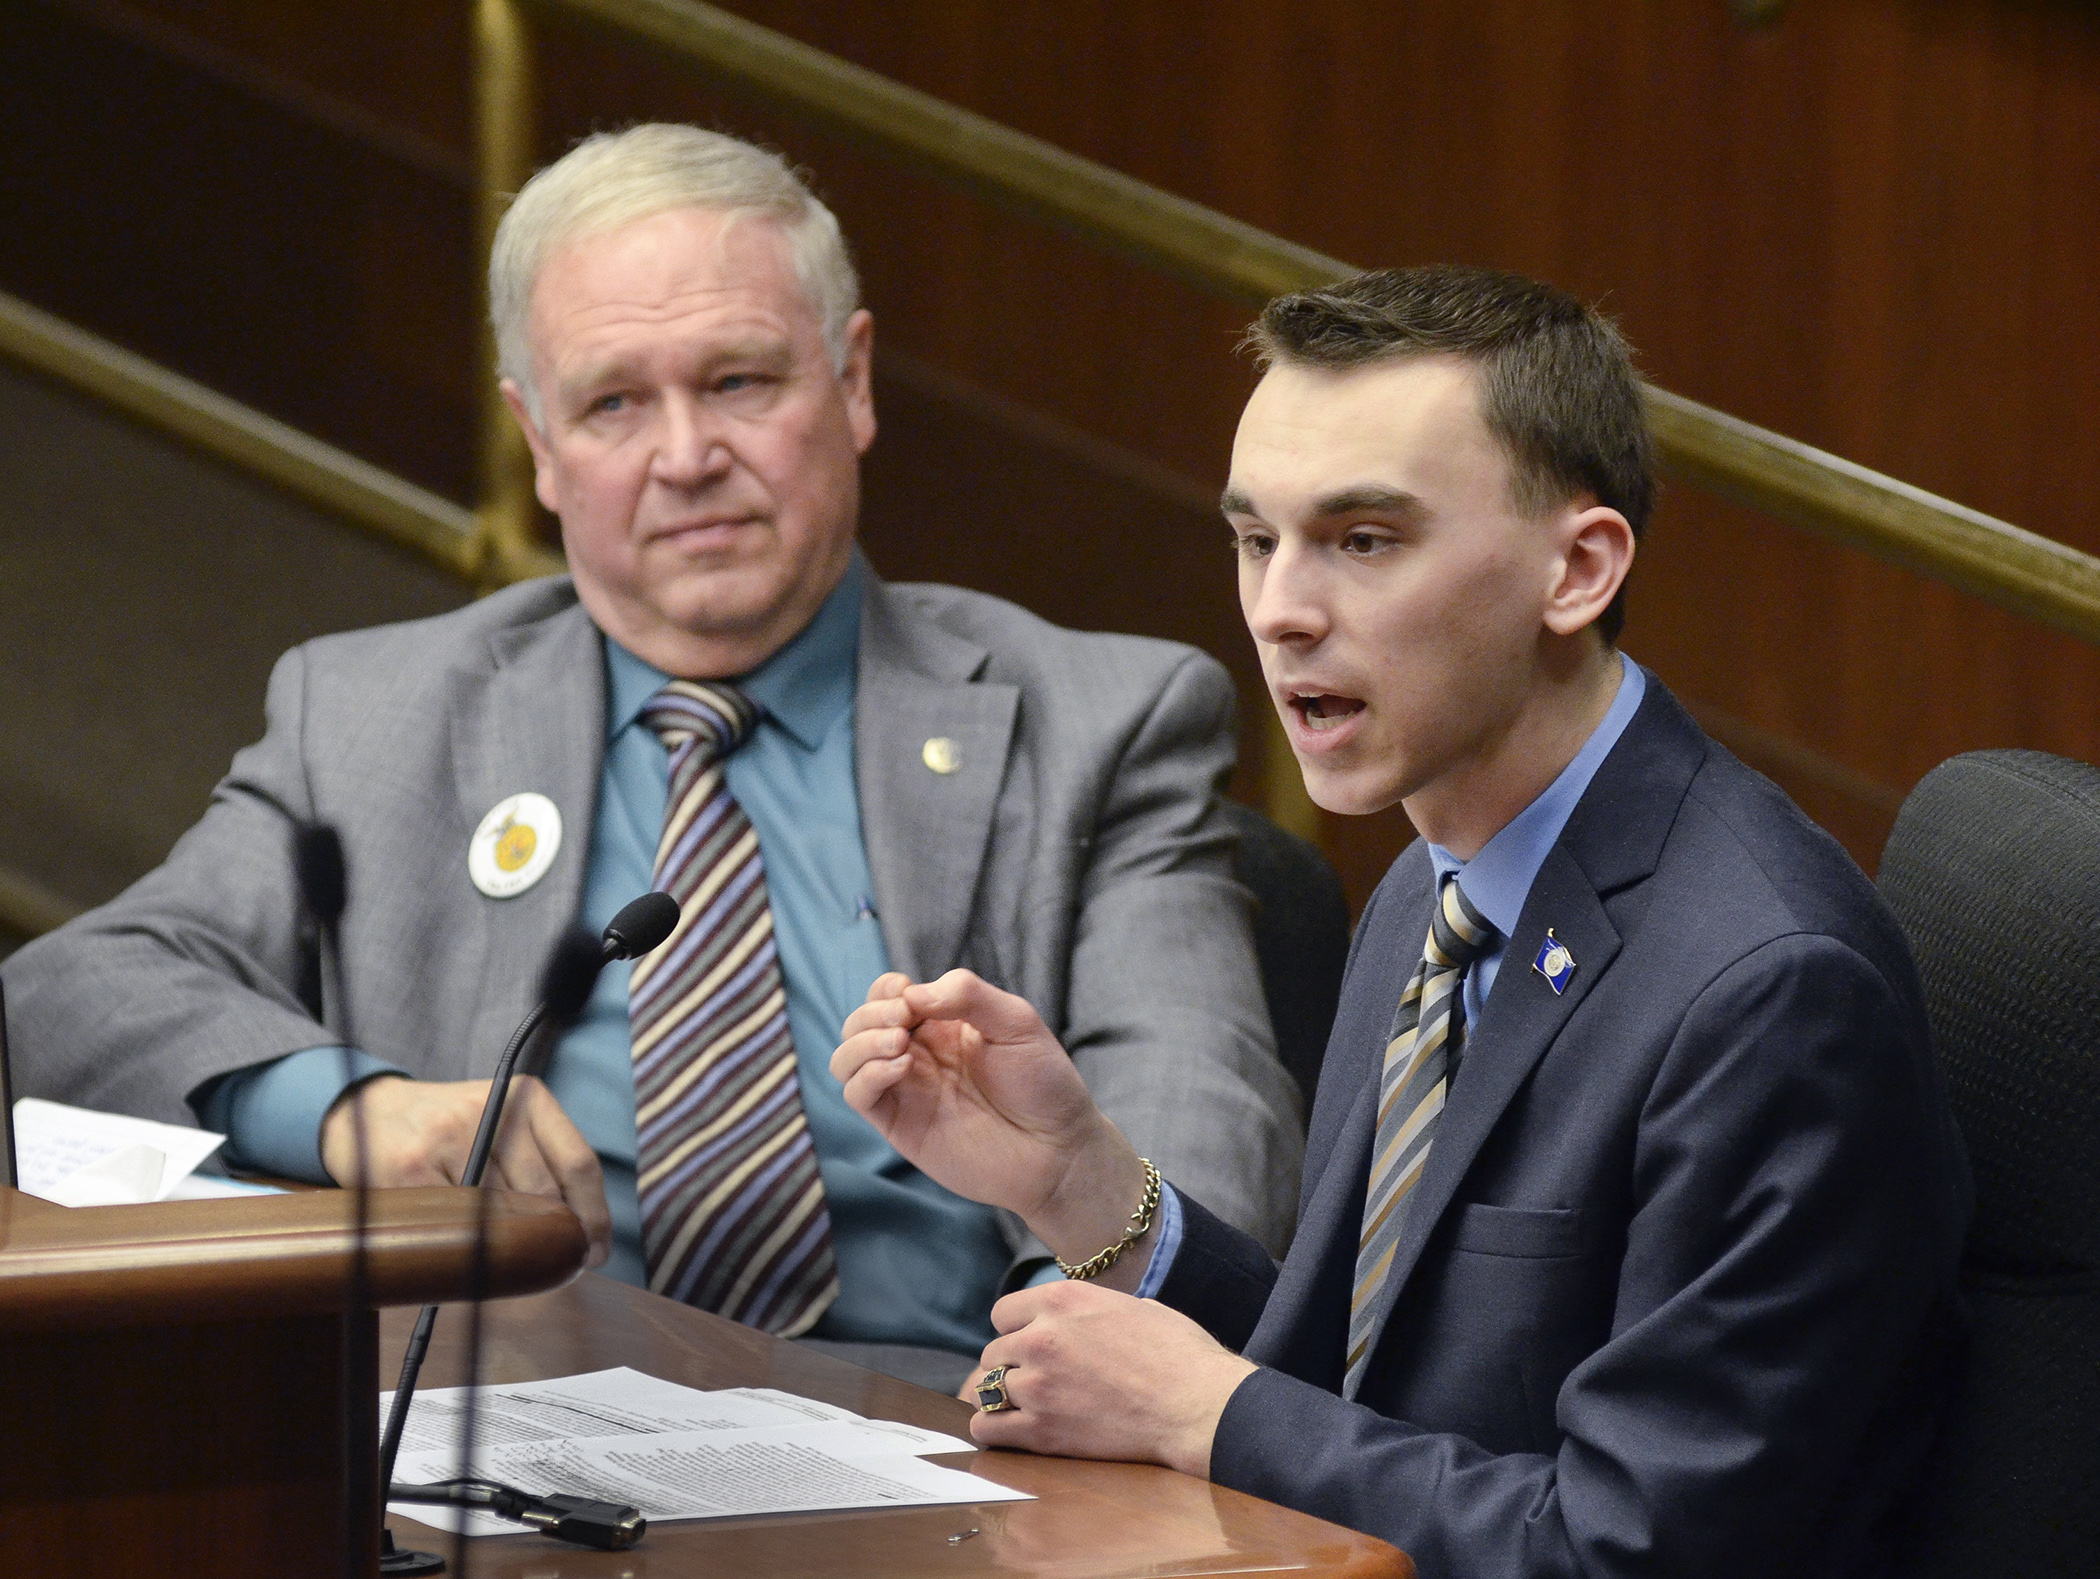 Dan Thomas-Cummins, an 18-year-old Lawrence University freshman, testifies before the House Government Operations and Elections Policy Committee Feb. 26 in support of a bill sponsored by Rep. Dean Urdahl, left, that would permit 17 year olds to register to vote. Photo by Andrew VonBank